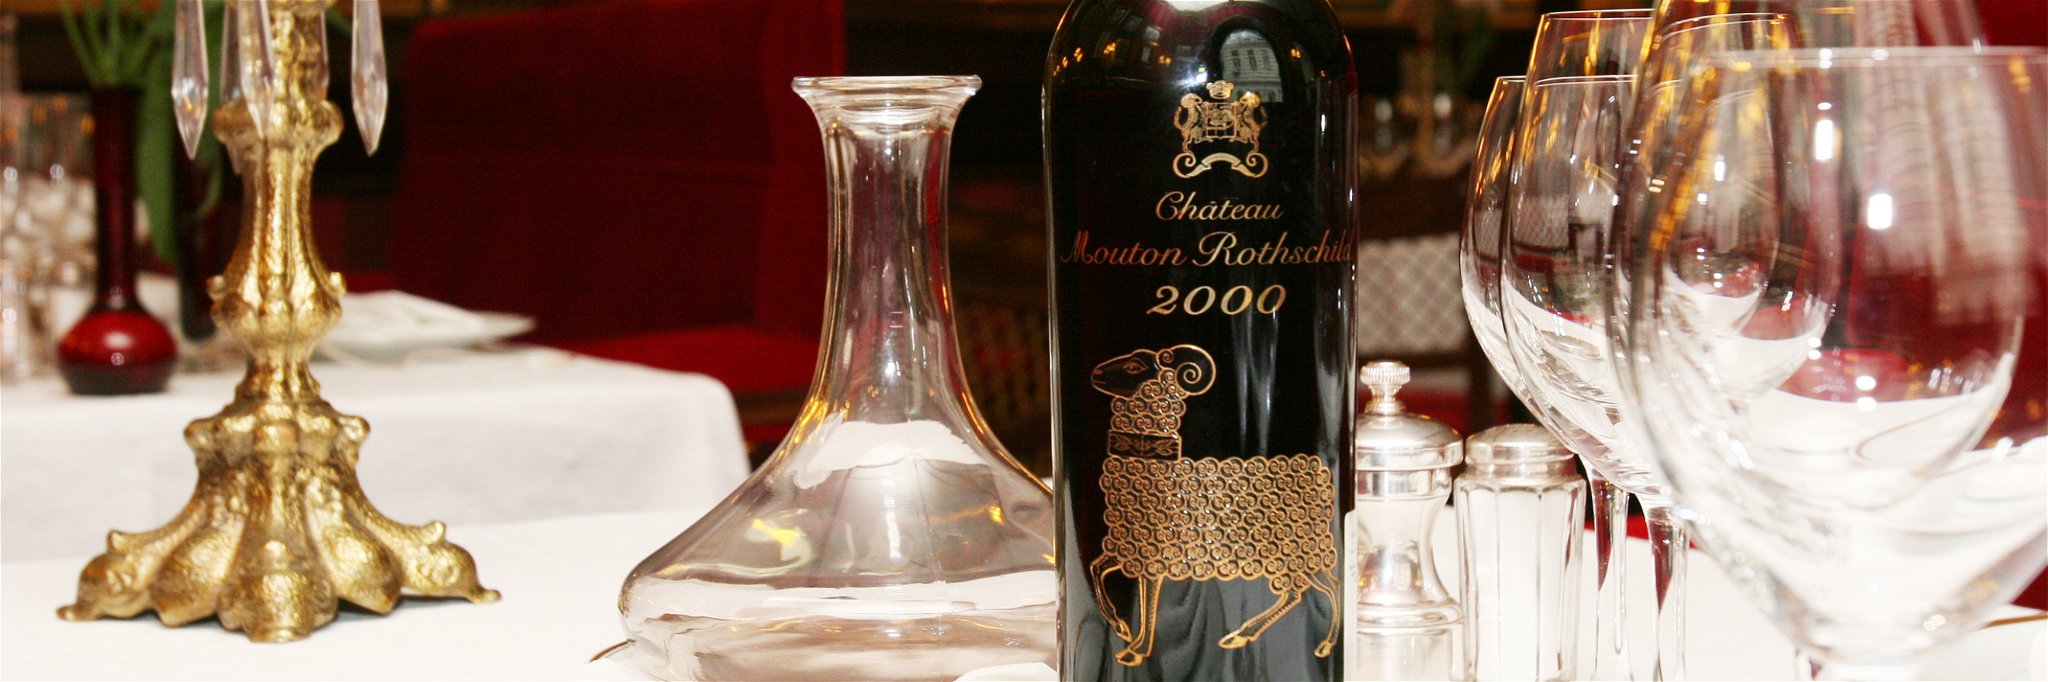 Each year an artist illustrates the&nbsp;Mouton Rothschild label, like this one from 2000.